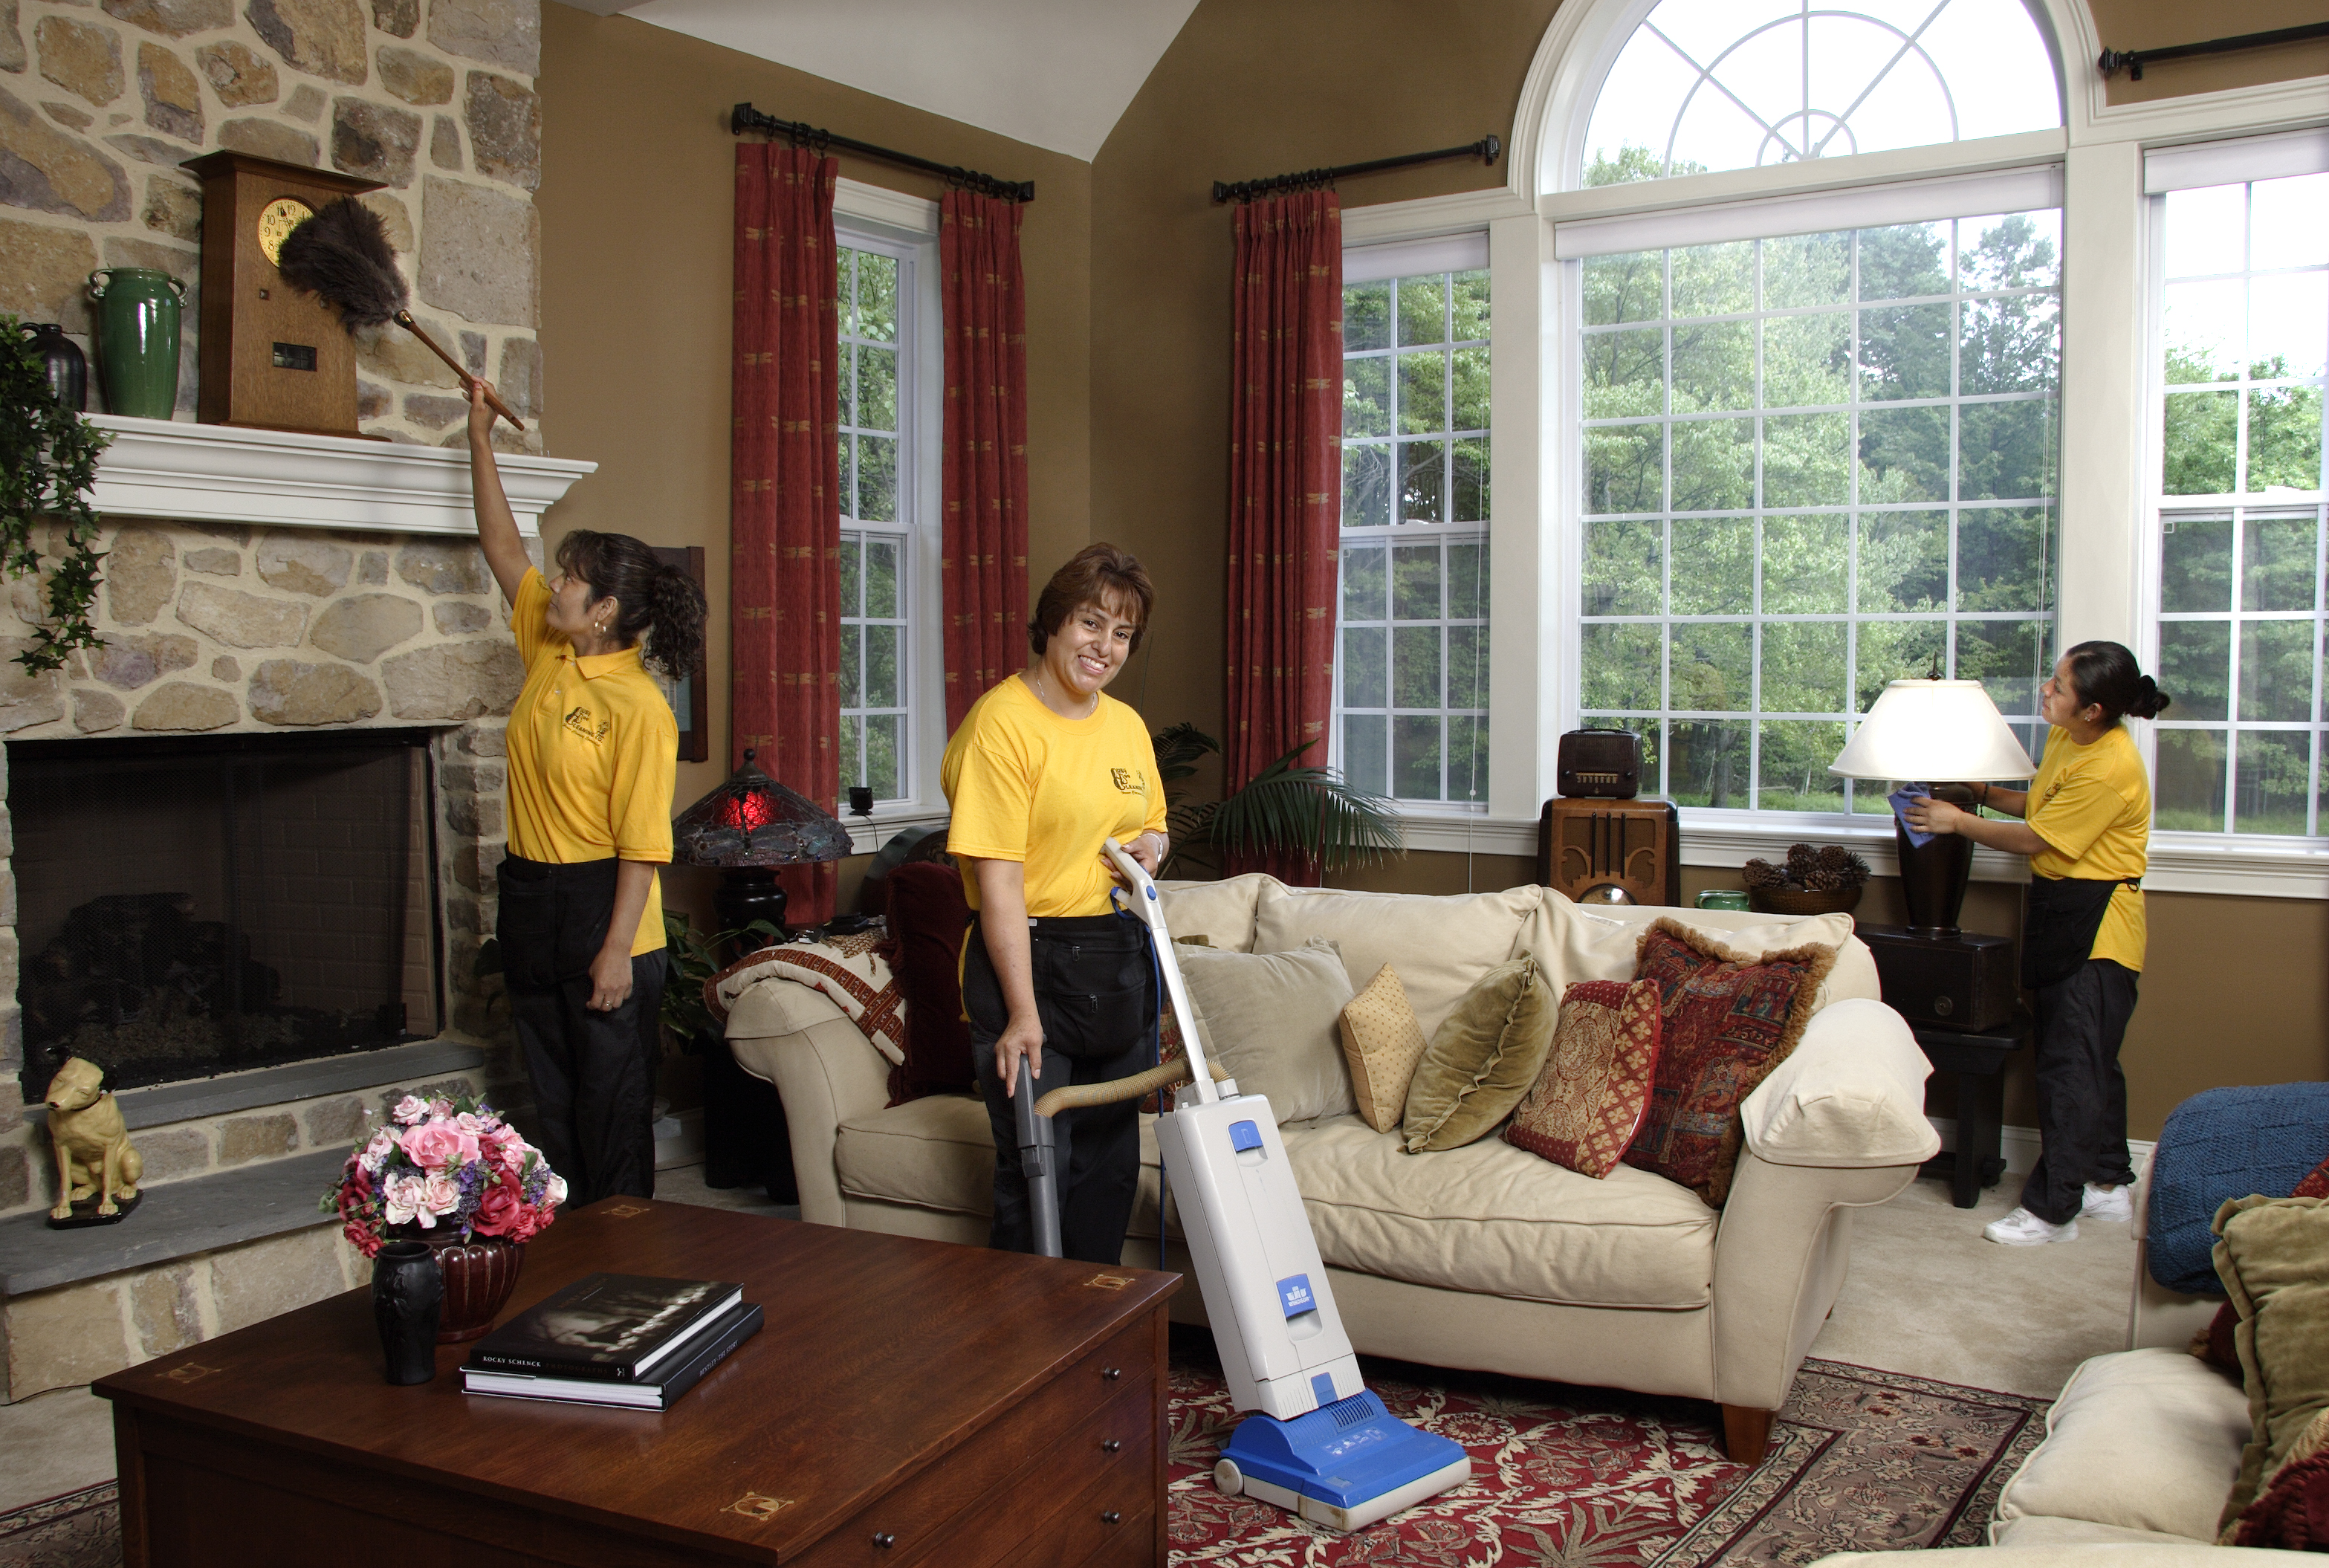 west chester cleaning services, house cleaning west chester pa, west chester home cleaning service, west chester house cleaning service, residential cleaning services west chester pa, house cleaner, house cleaning services, cleaning services in west, house, job, floors, customers, cost, request